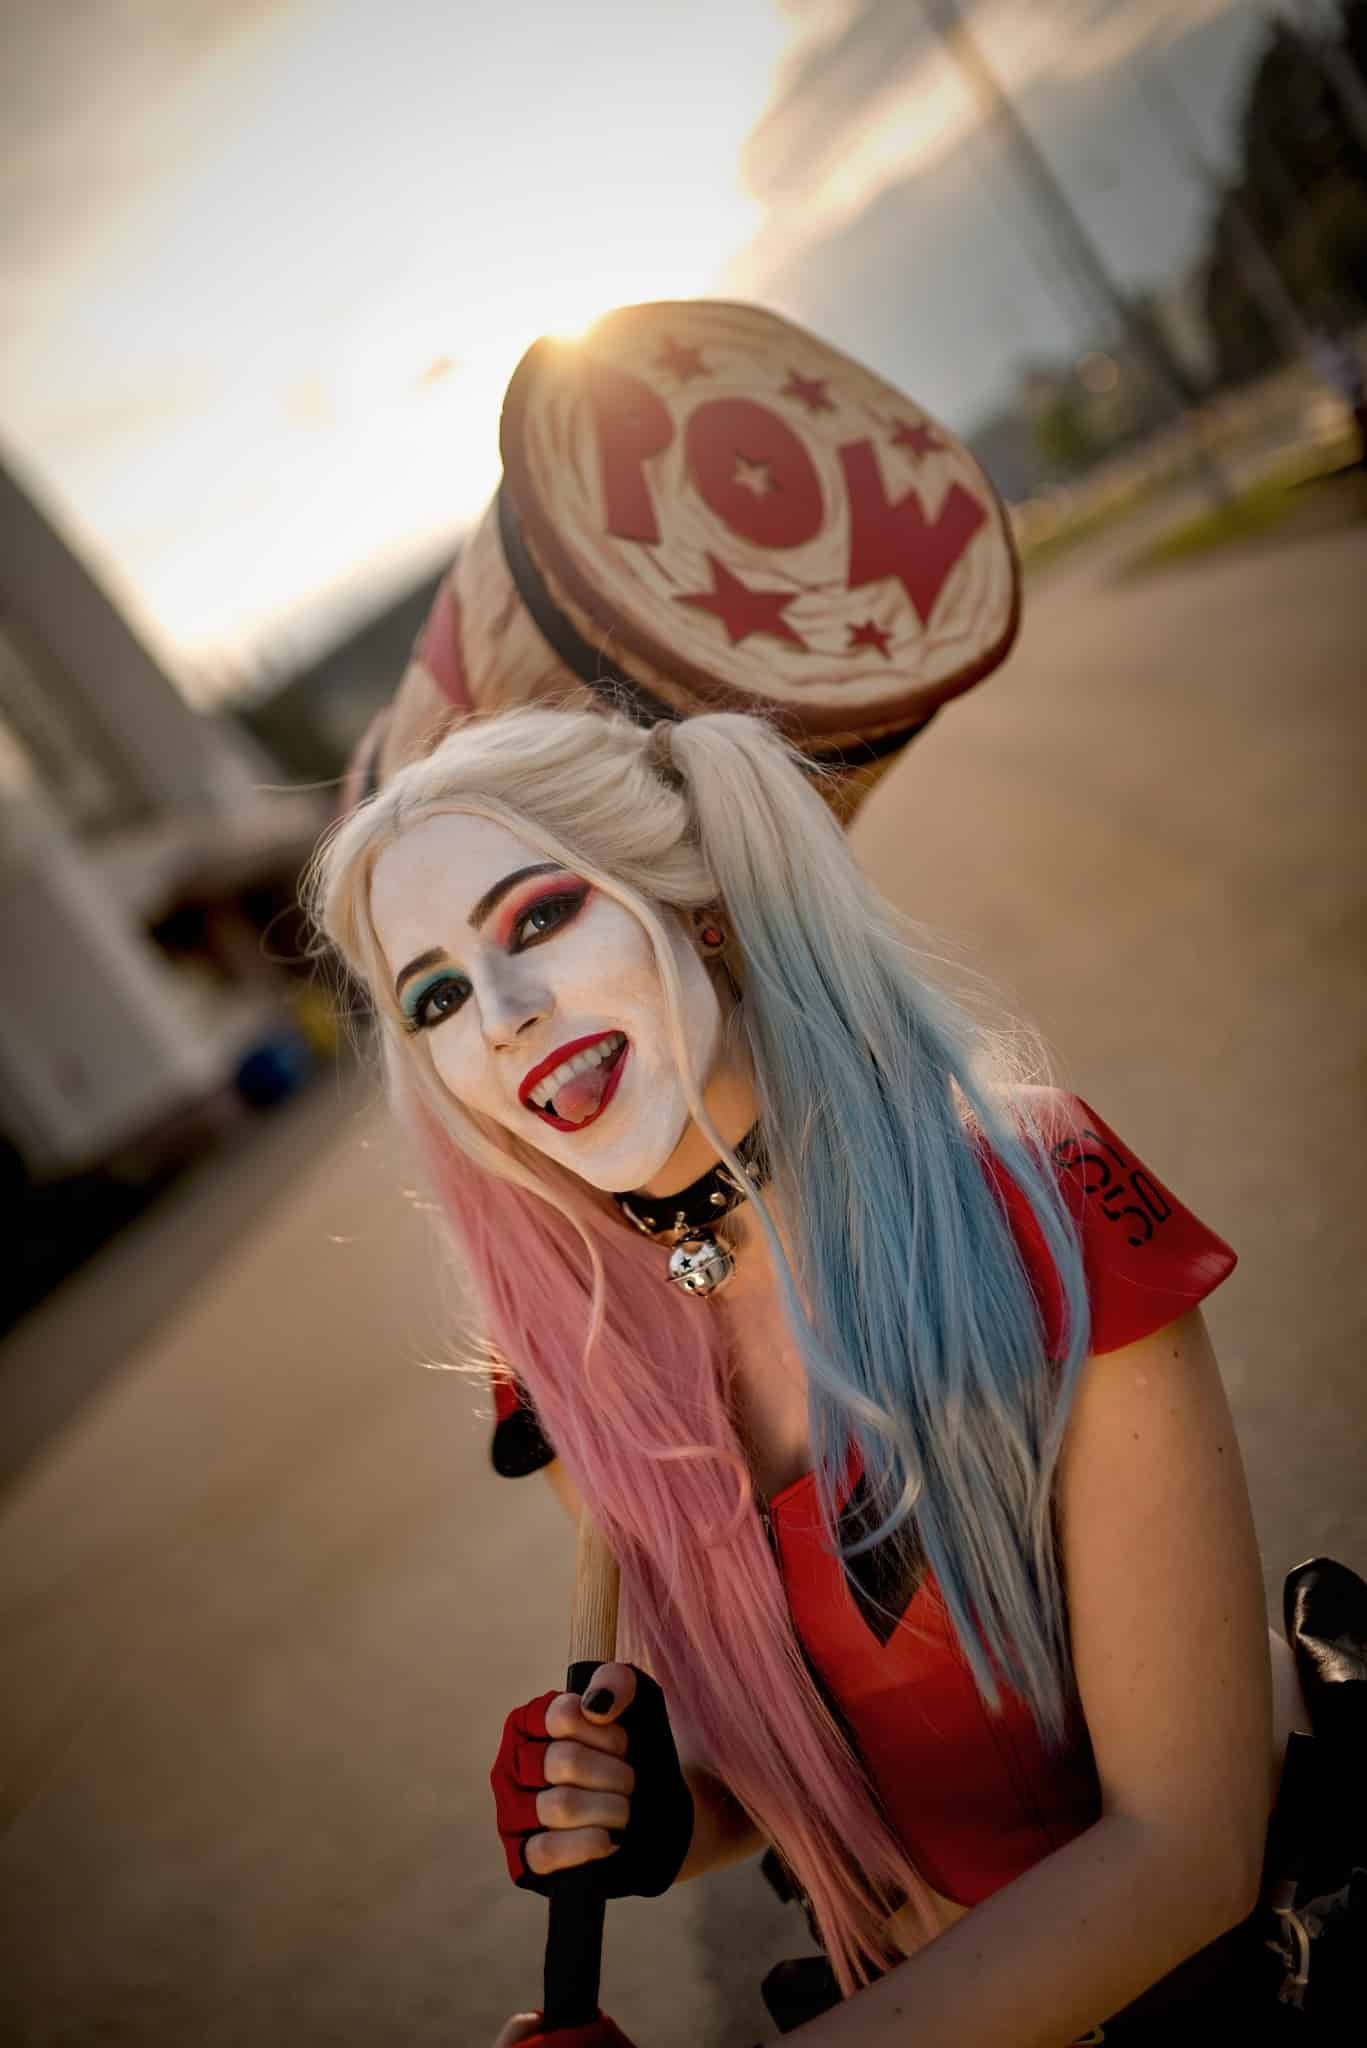 How to Photograph a Cosplay - Harley Quinn cosplay